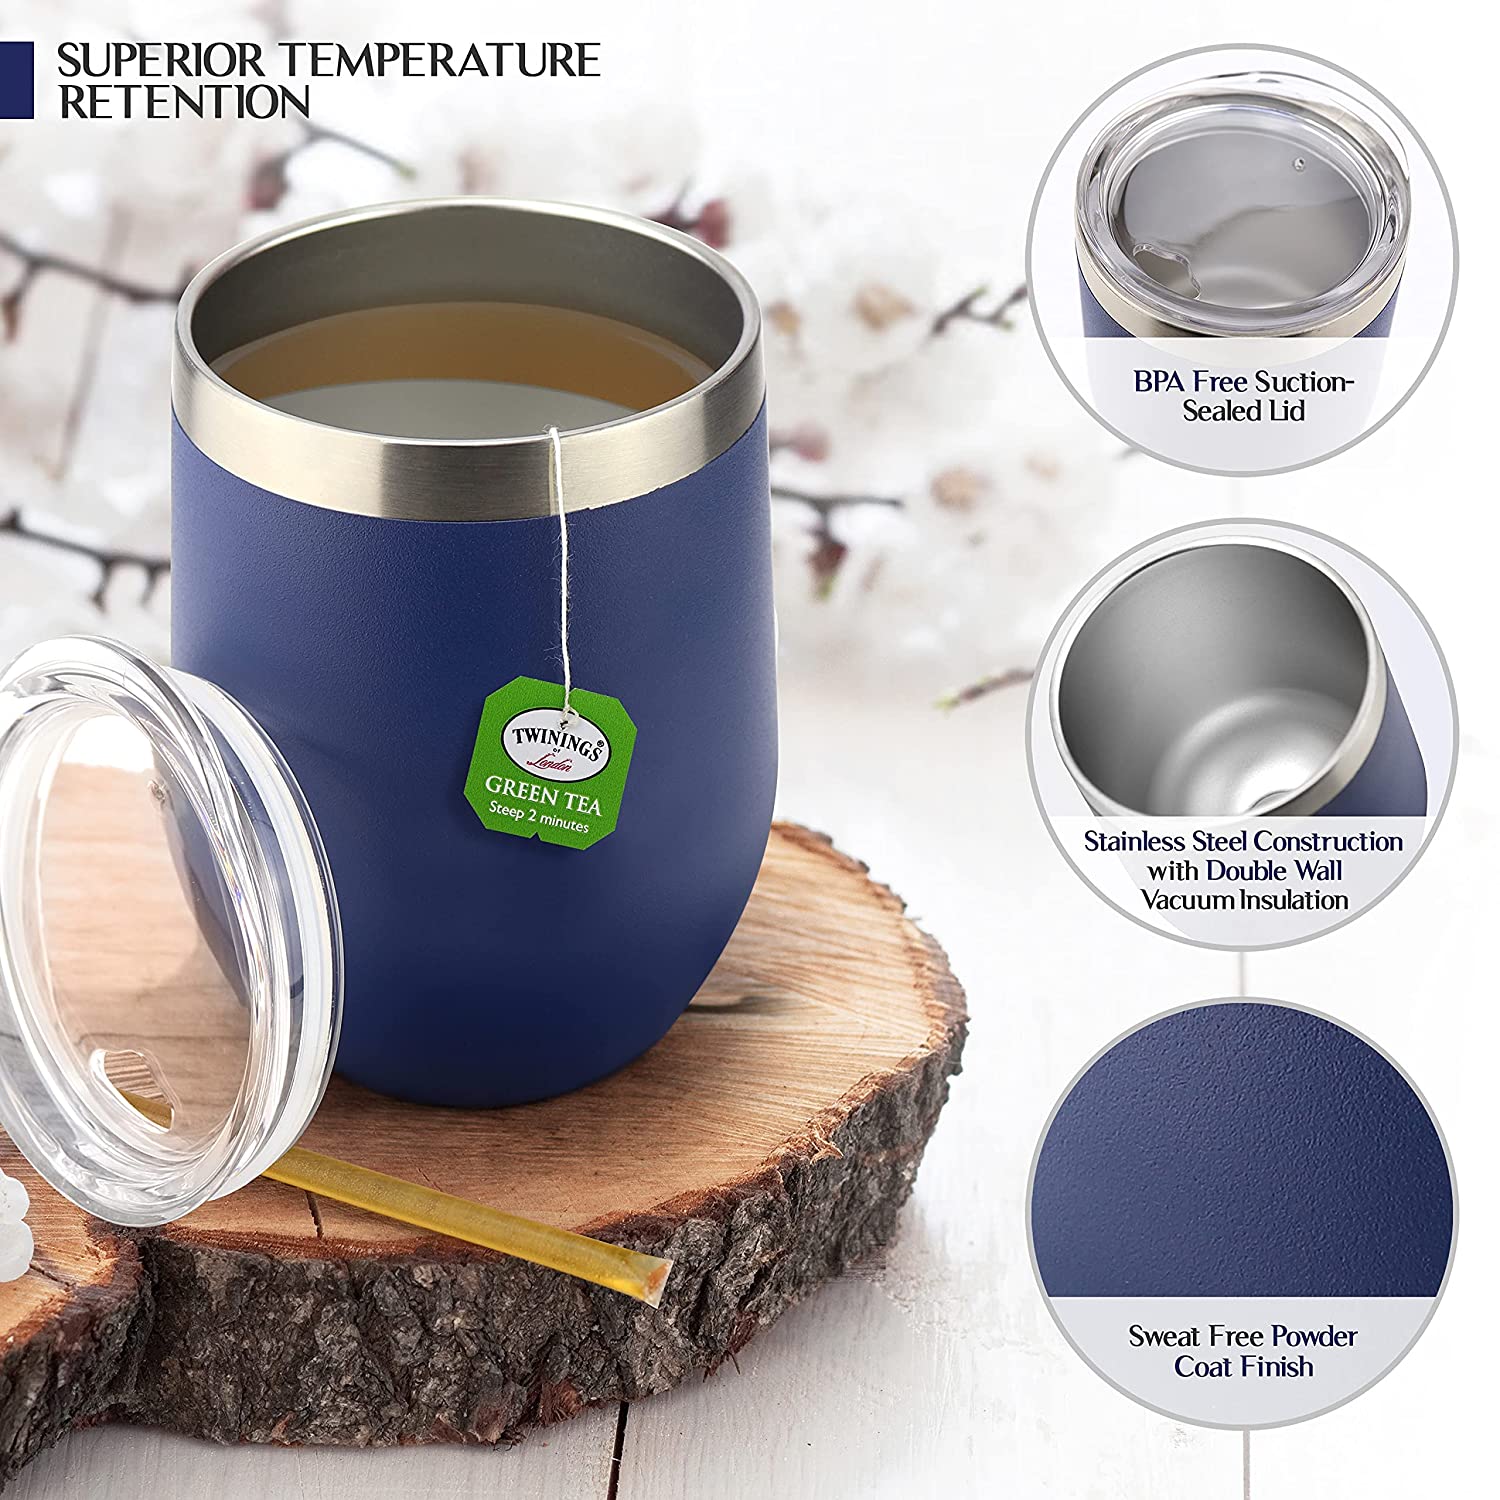 https://bigbigmart.com/wp-content/uploads/2022/03/Tea-Gift-Set-for-Tea-Lovers-Includes-Double-Insulated-Tea-Cup-12-Uniquely-Blended-Teas4.jpg